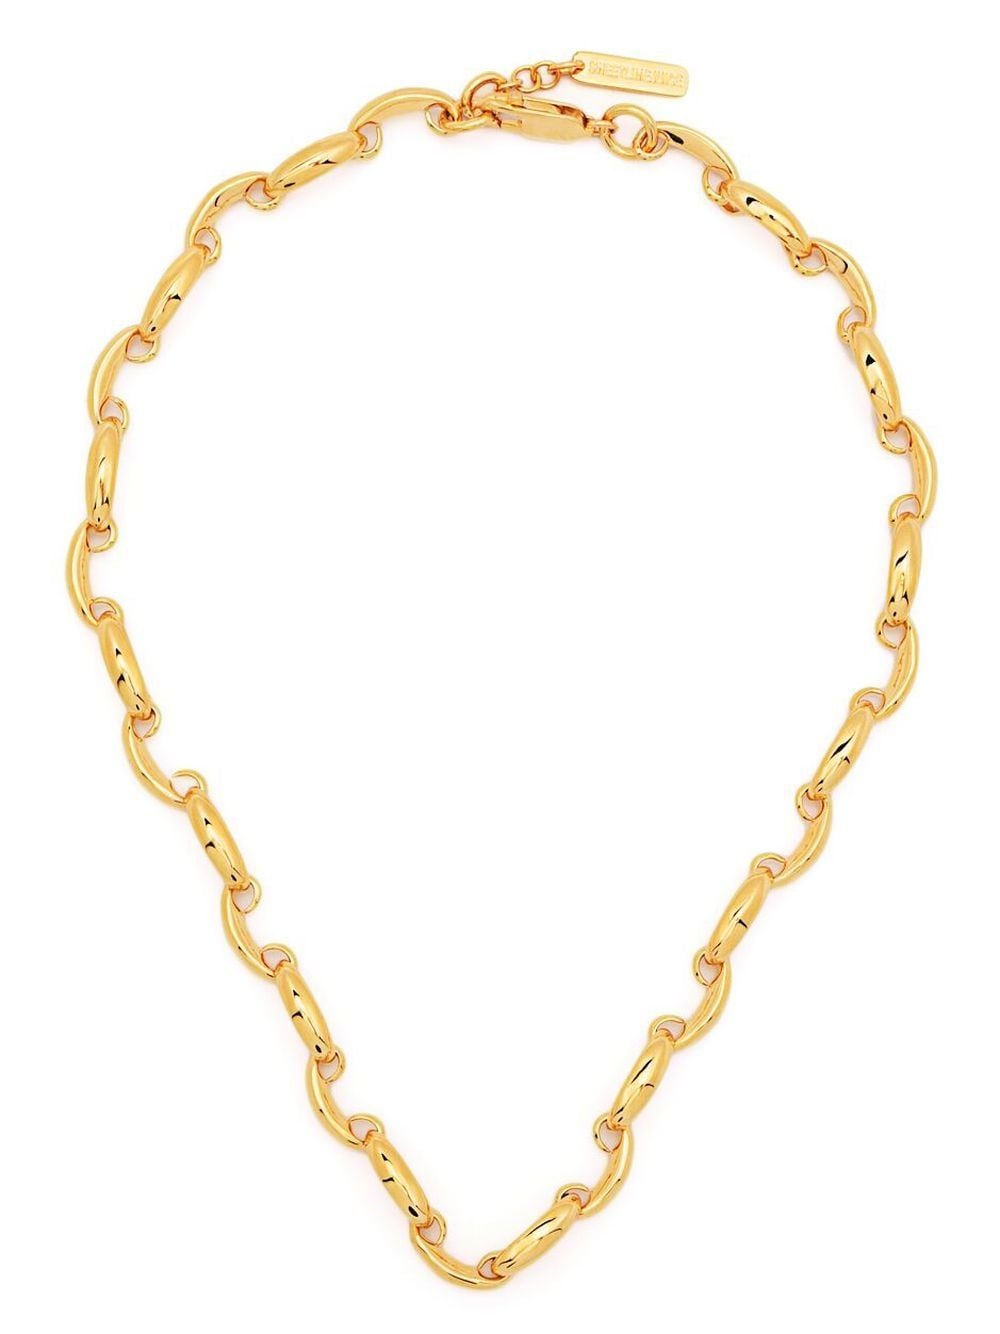 gold-tone necklace